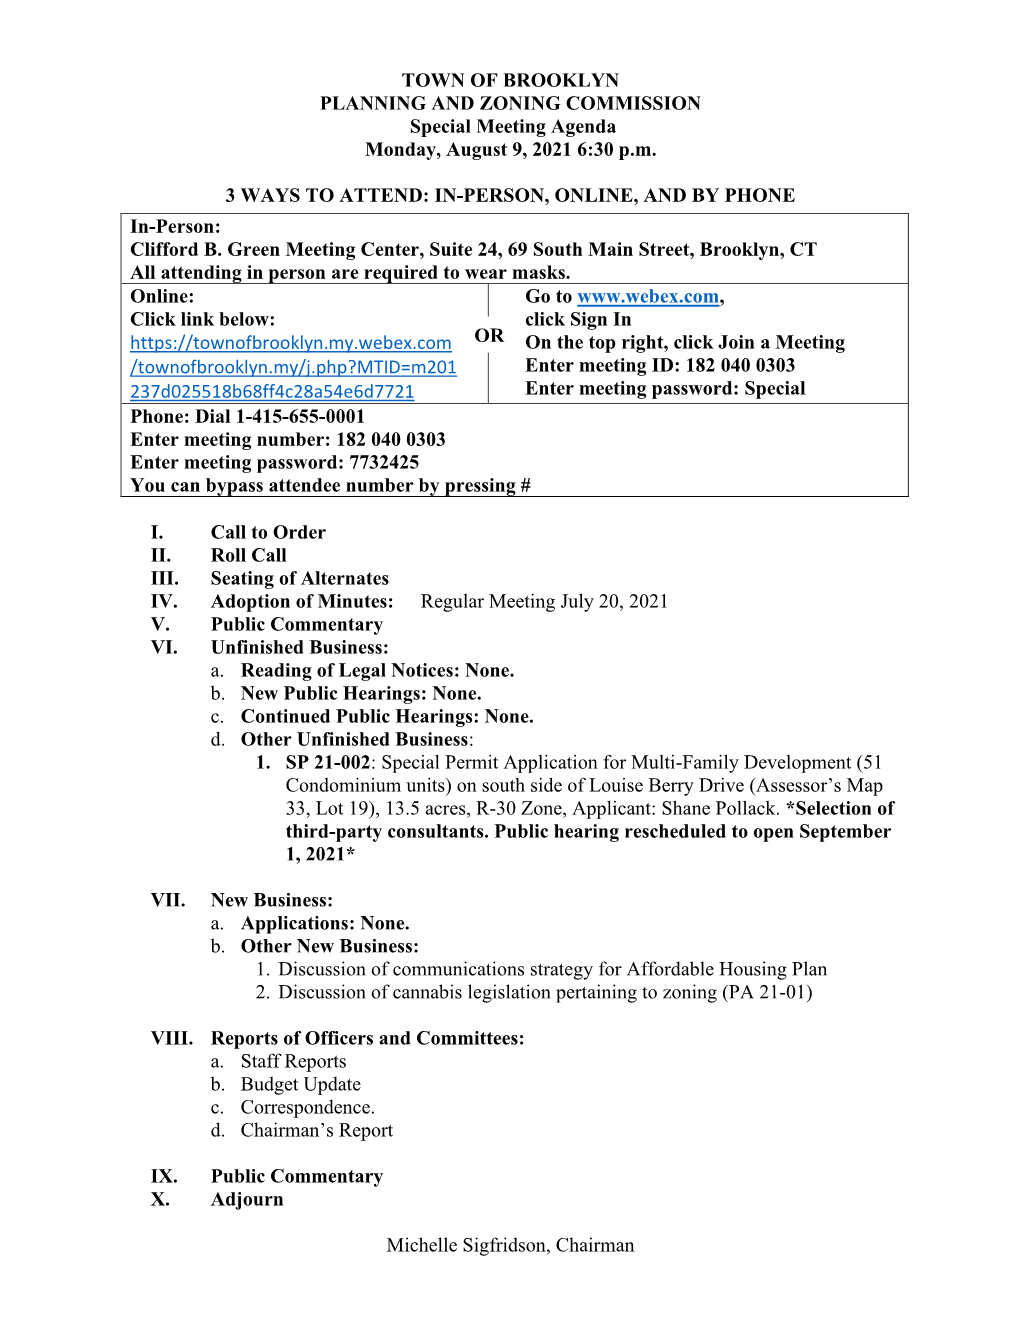 TOWN of BROOKLYN PLANNING and ZONING COMMISSION Special Meeting Agenda Monday, August 9, 2021 6:30 P.M